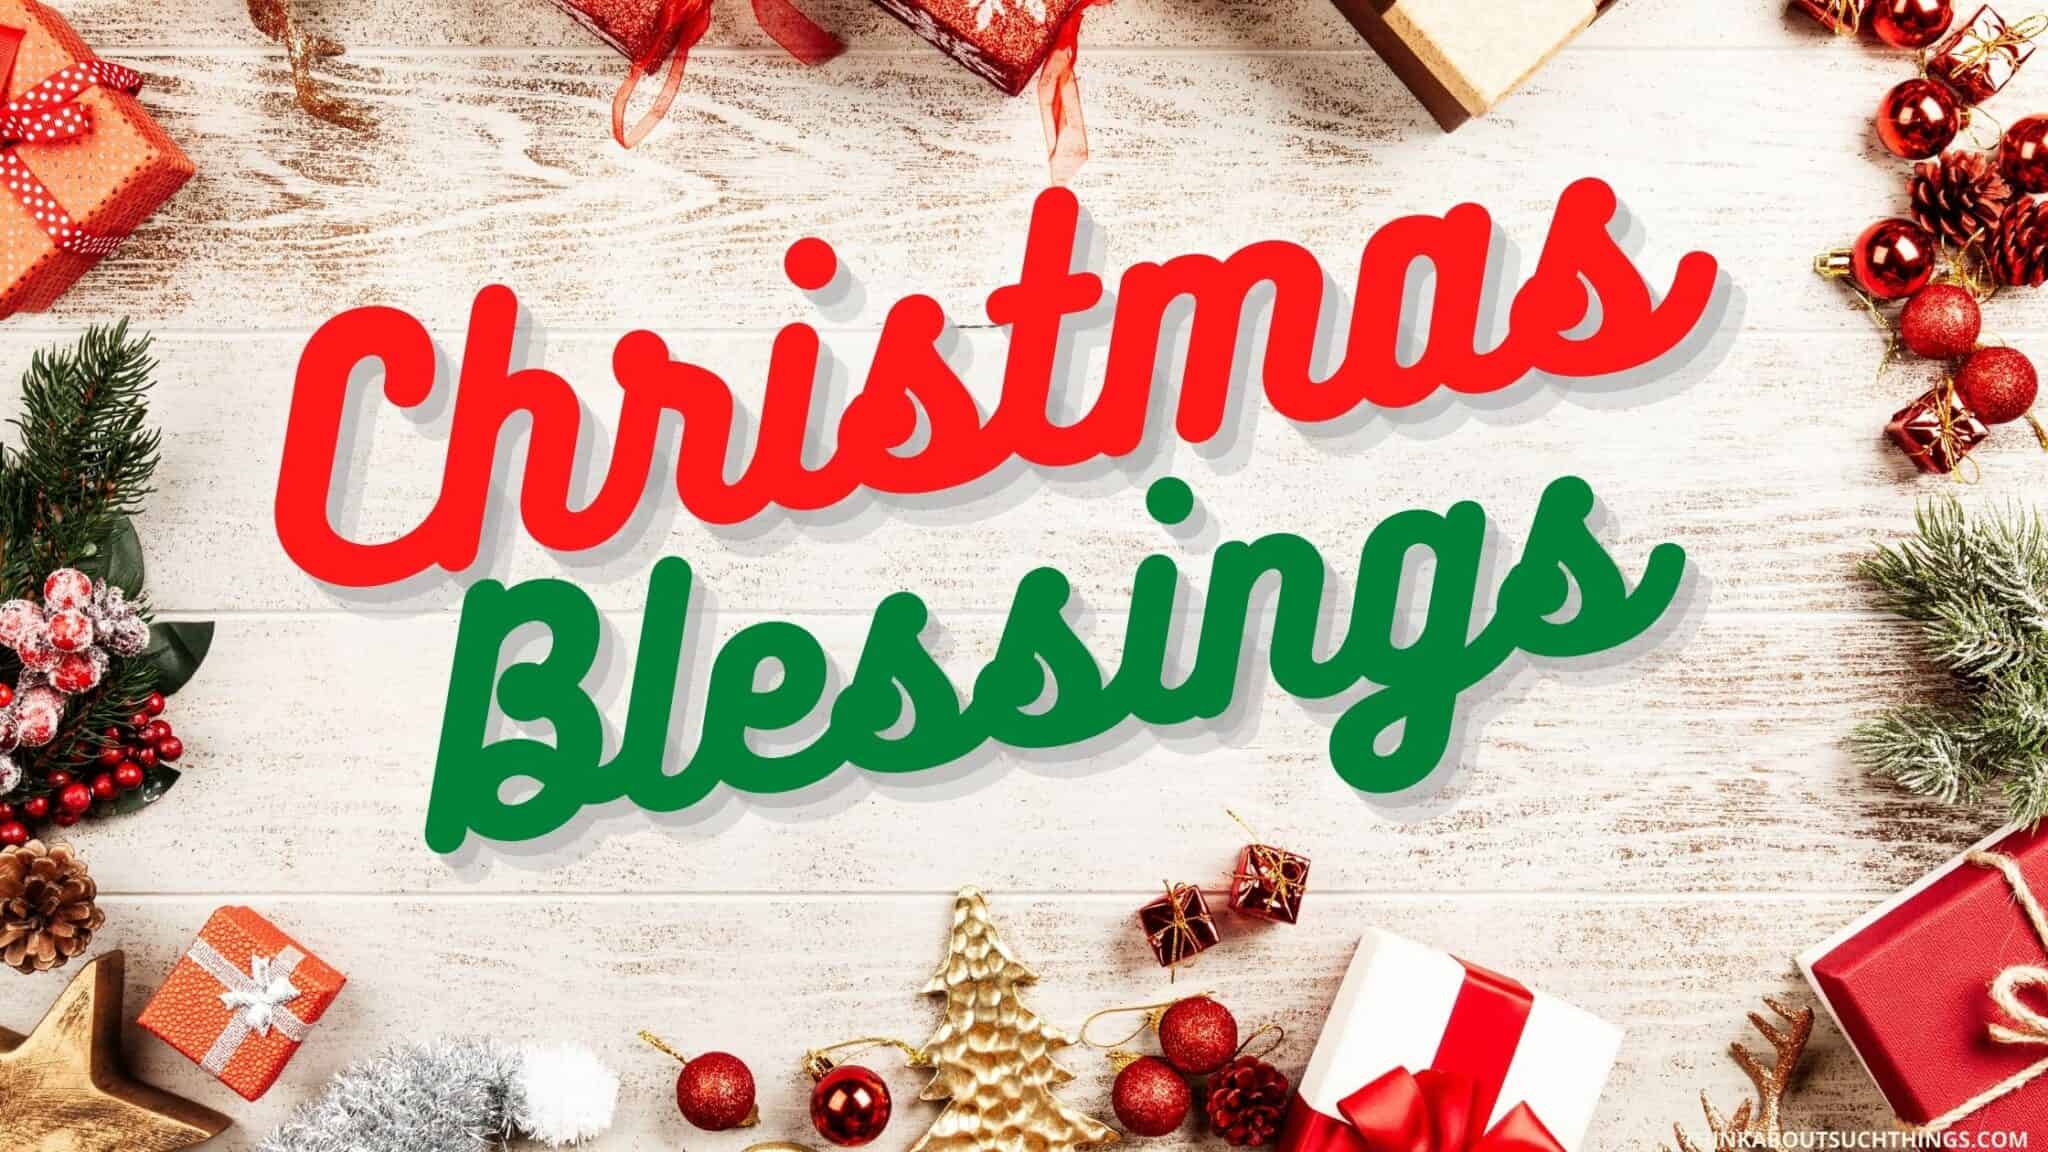 27 Christmas Blessings To Share During The Holidays [With Images